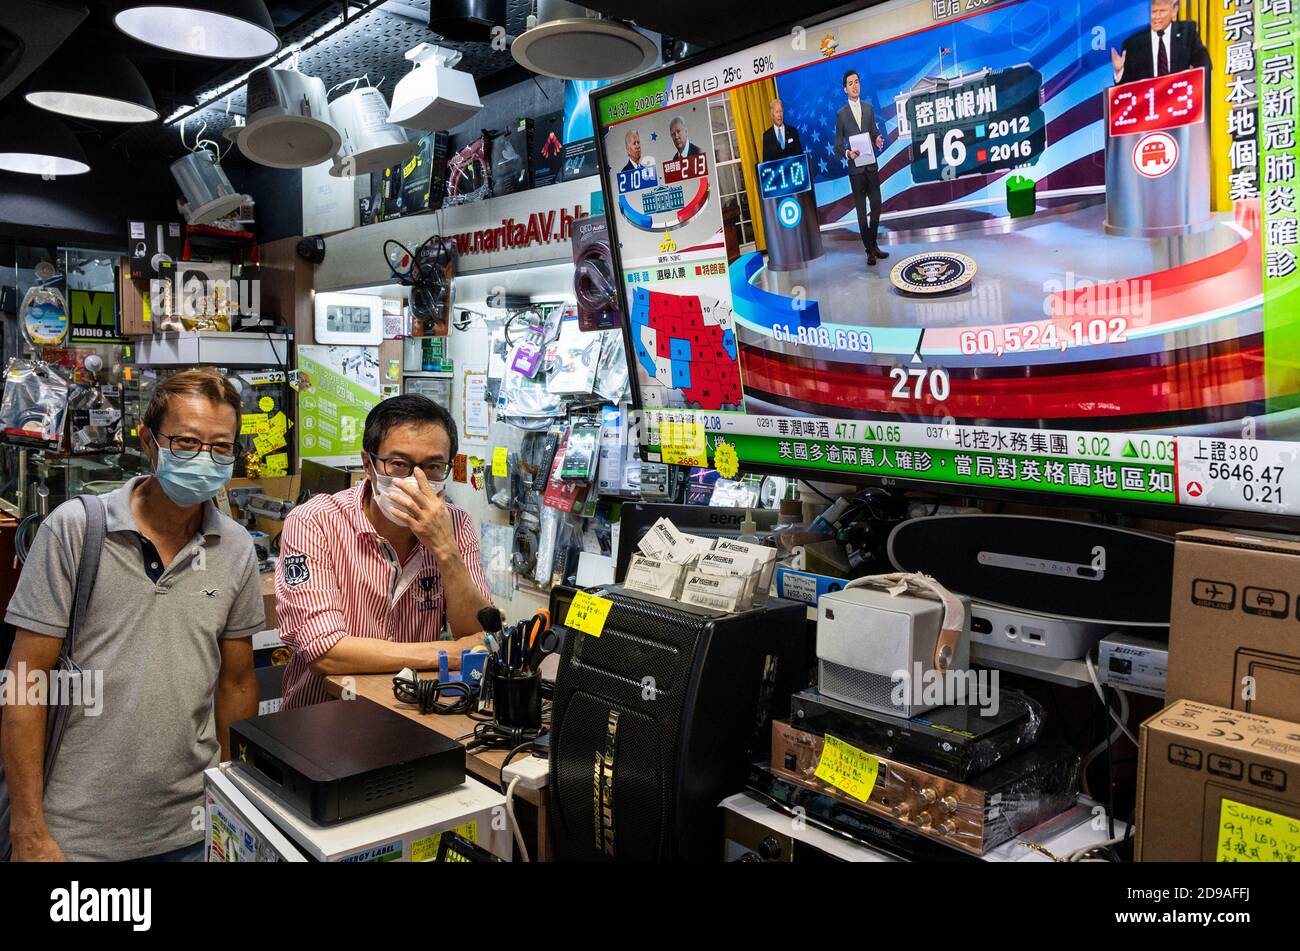 An electronic goods store displays a television screen for sale with live news report about the US presidential election. Stock Photo